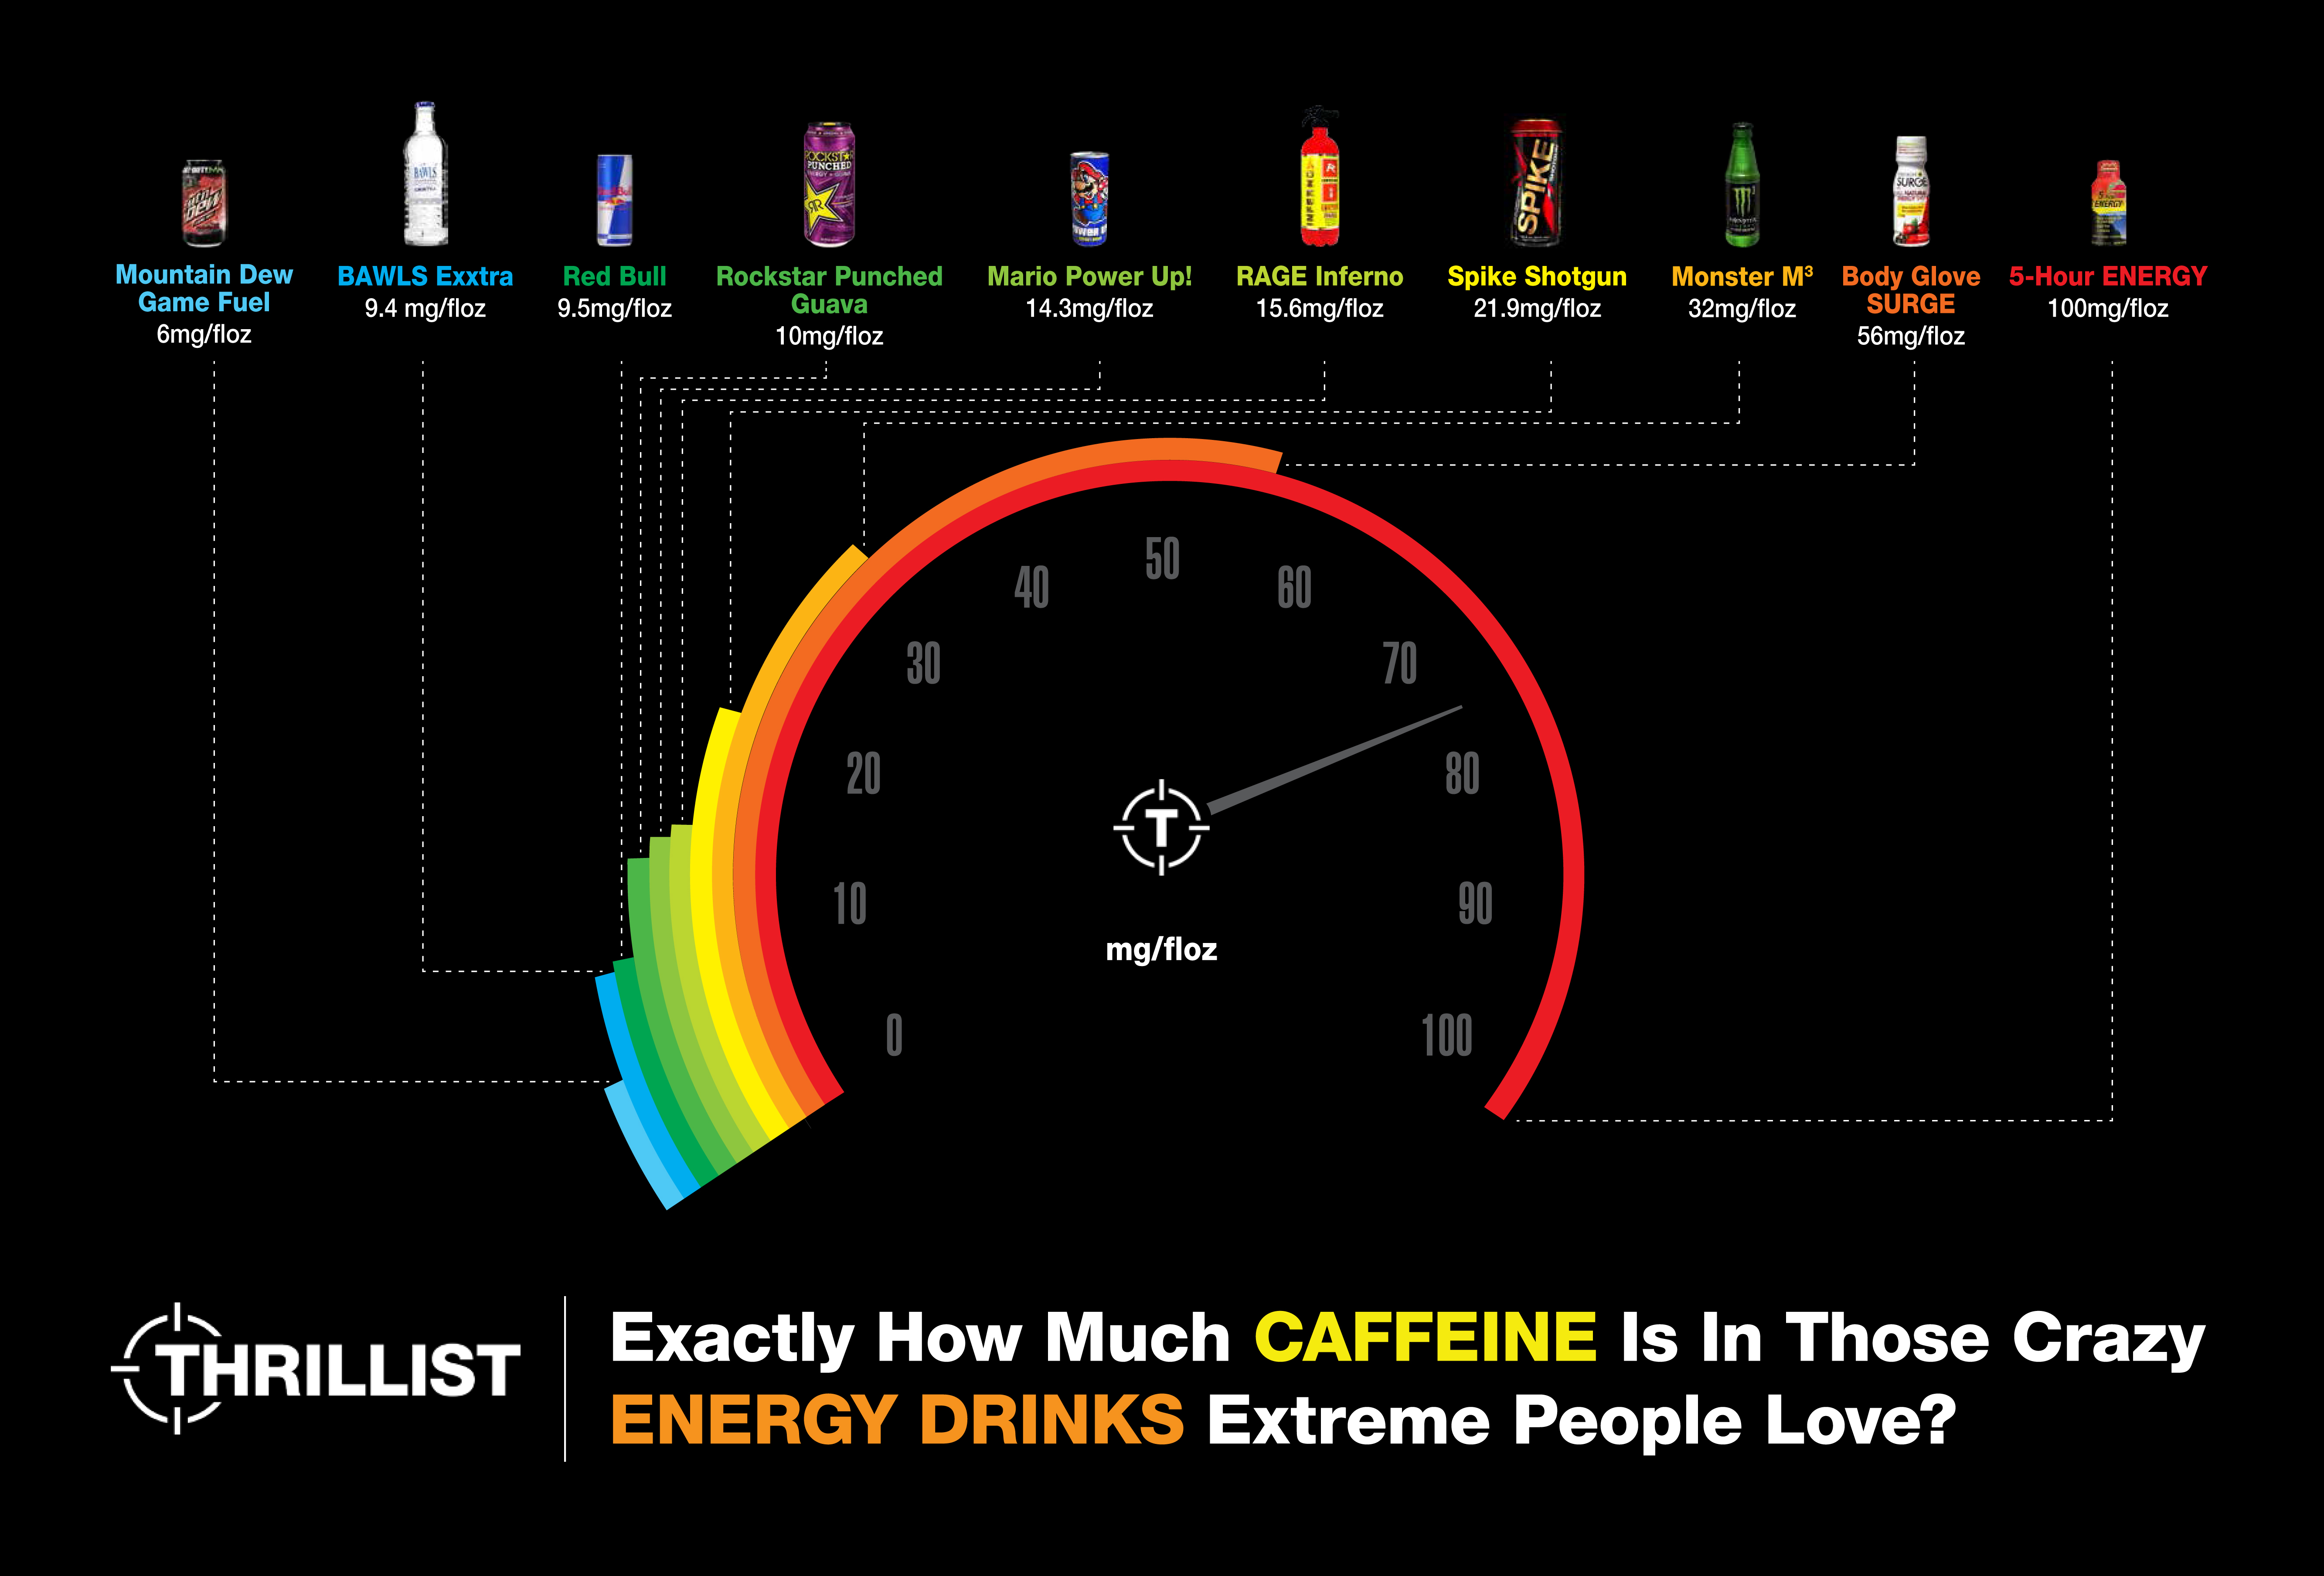 Exactly How Much Caffeine Is In Those Crazy Energy Drinks Extreme People Love